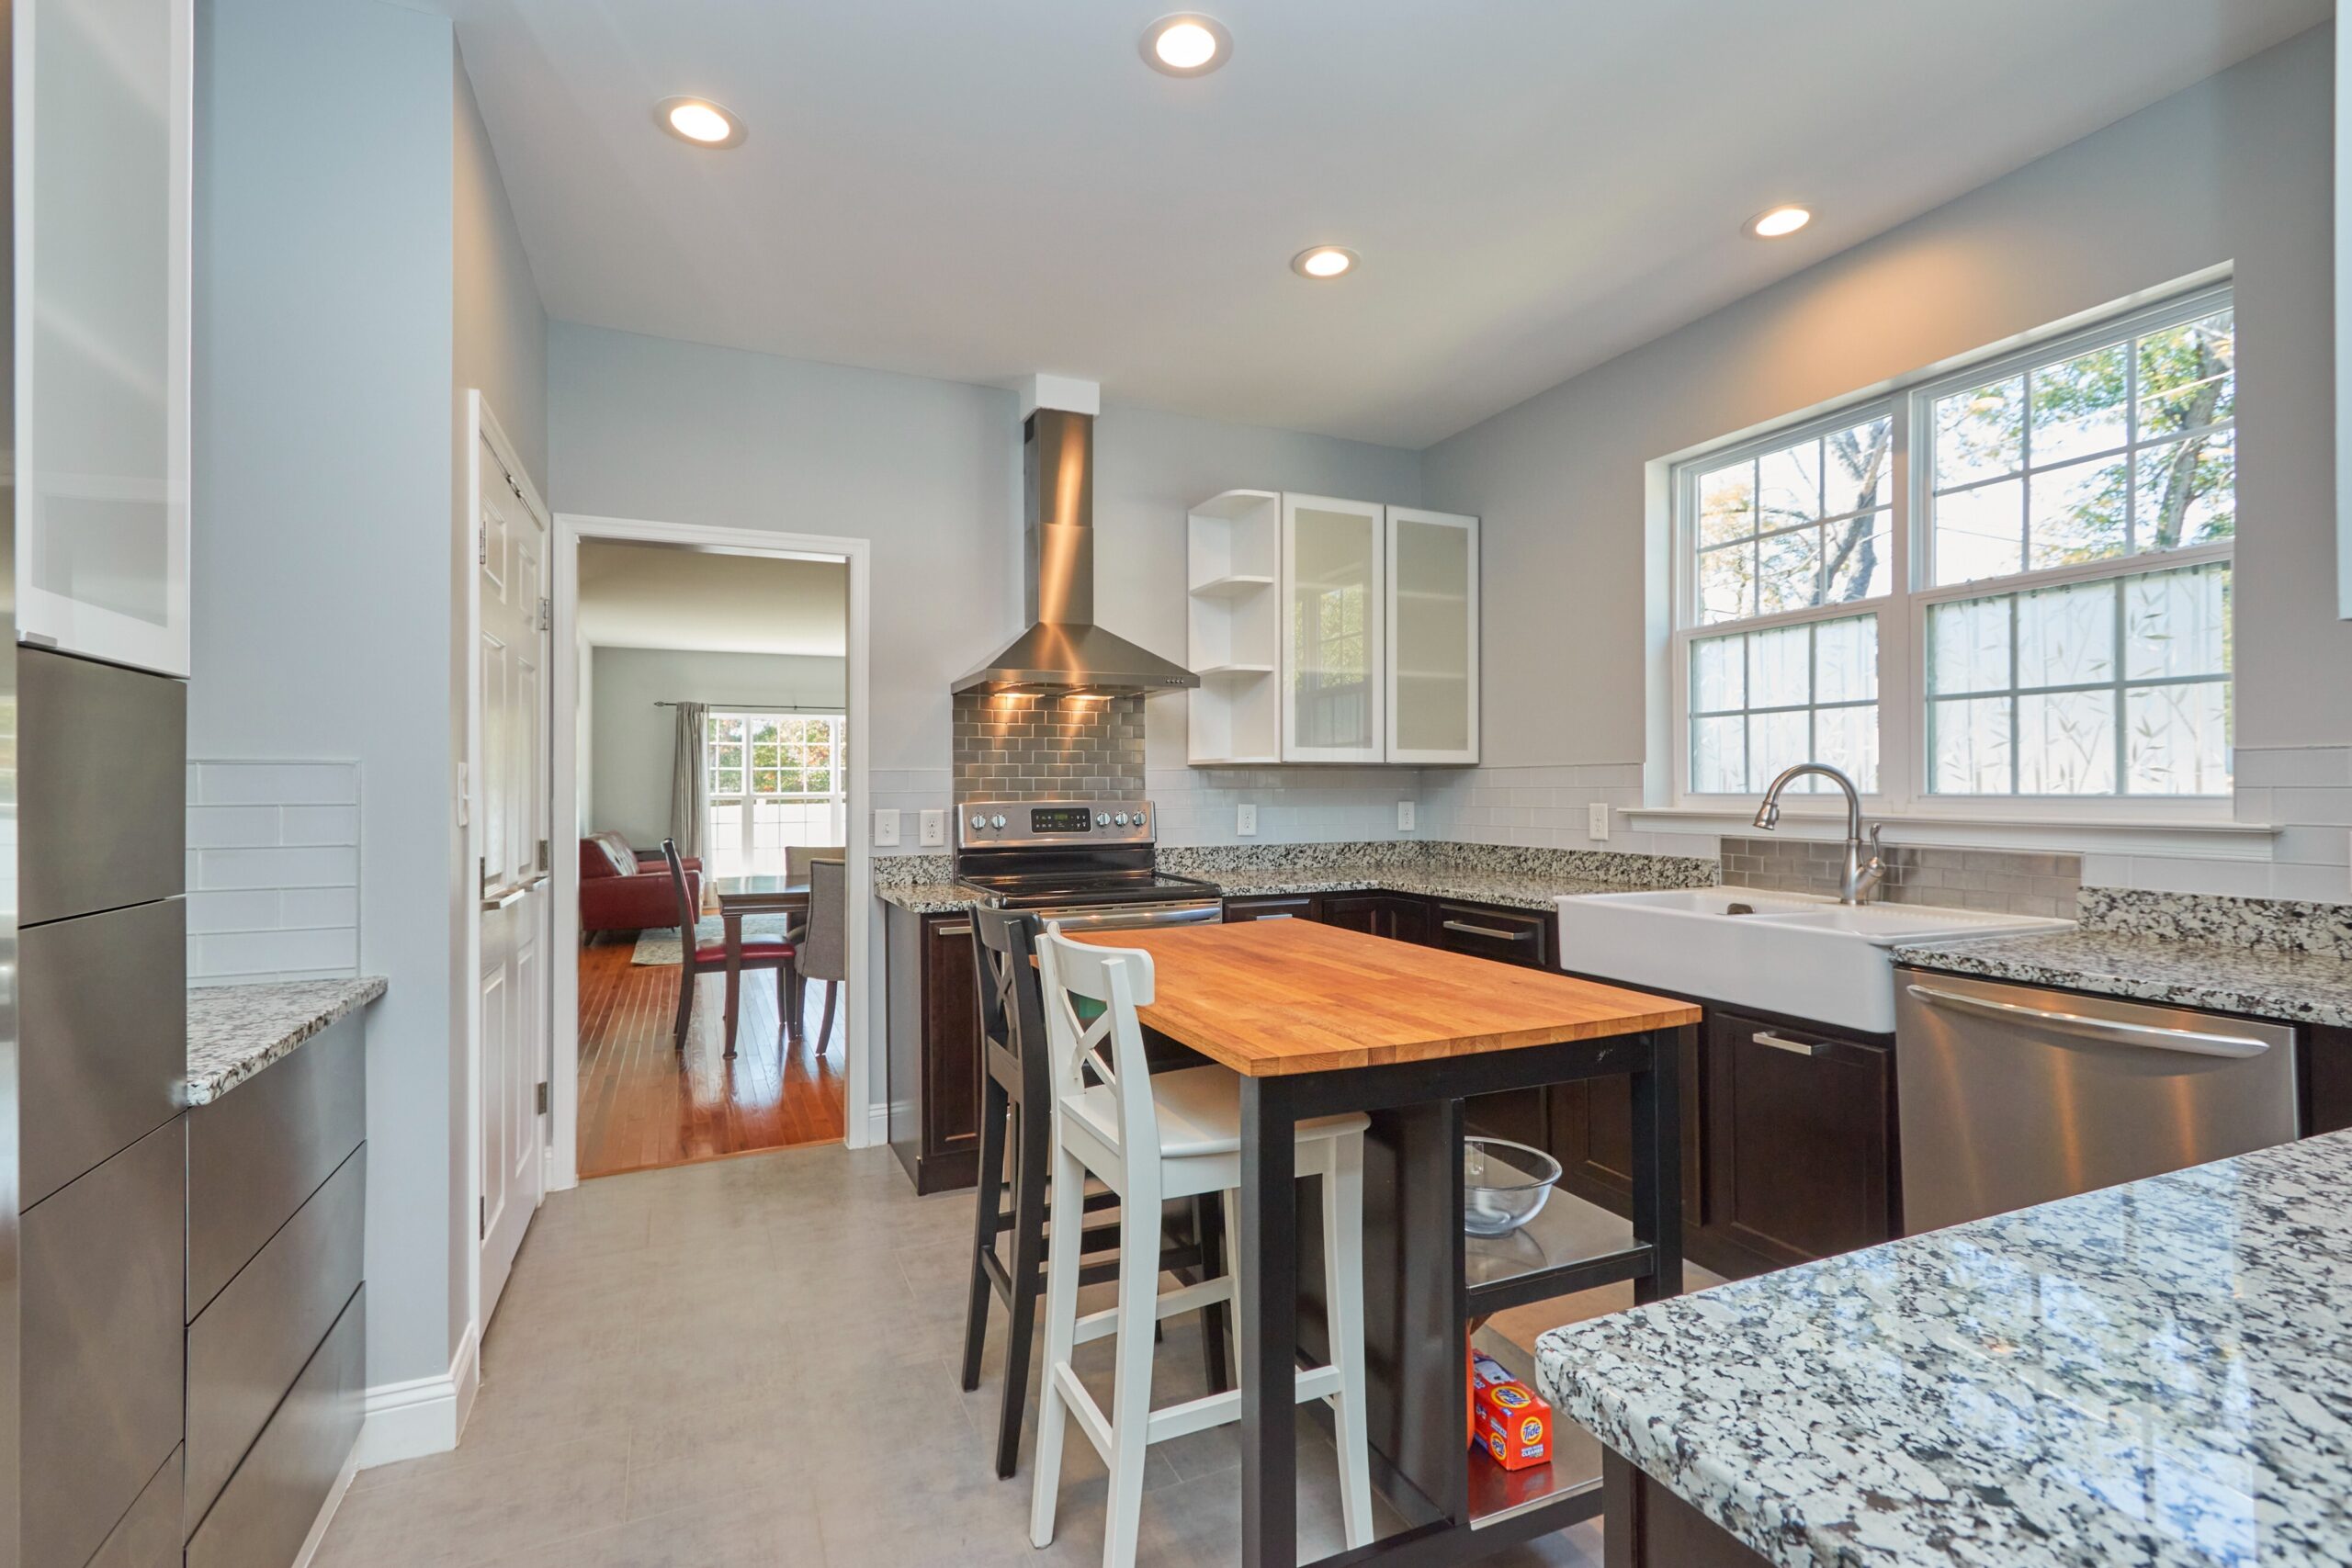 Professional interior photograph of 384 C Street - showing the kitchen with granite counters, stainless appliances and butcher block island with stools and storage